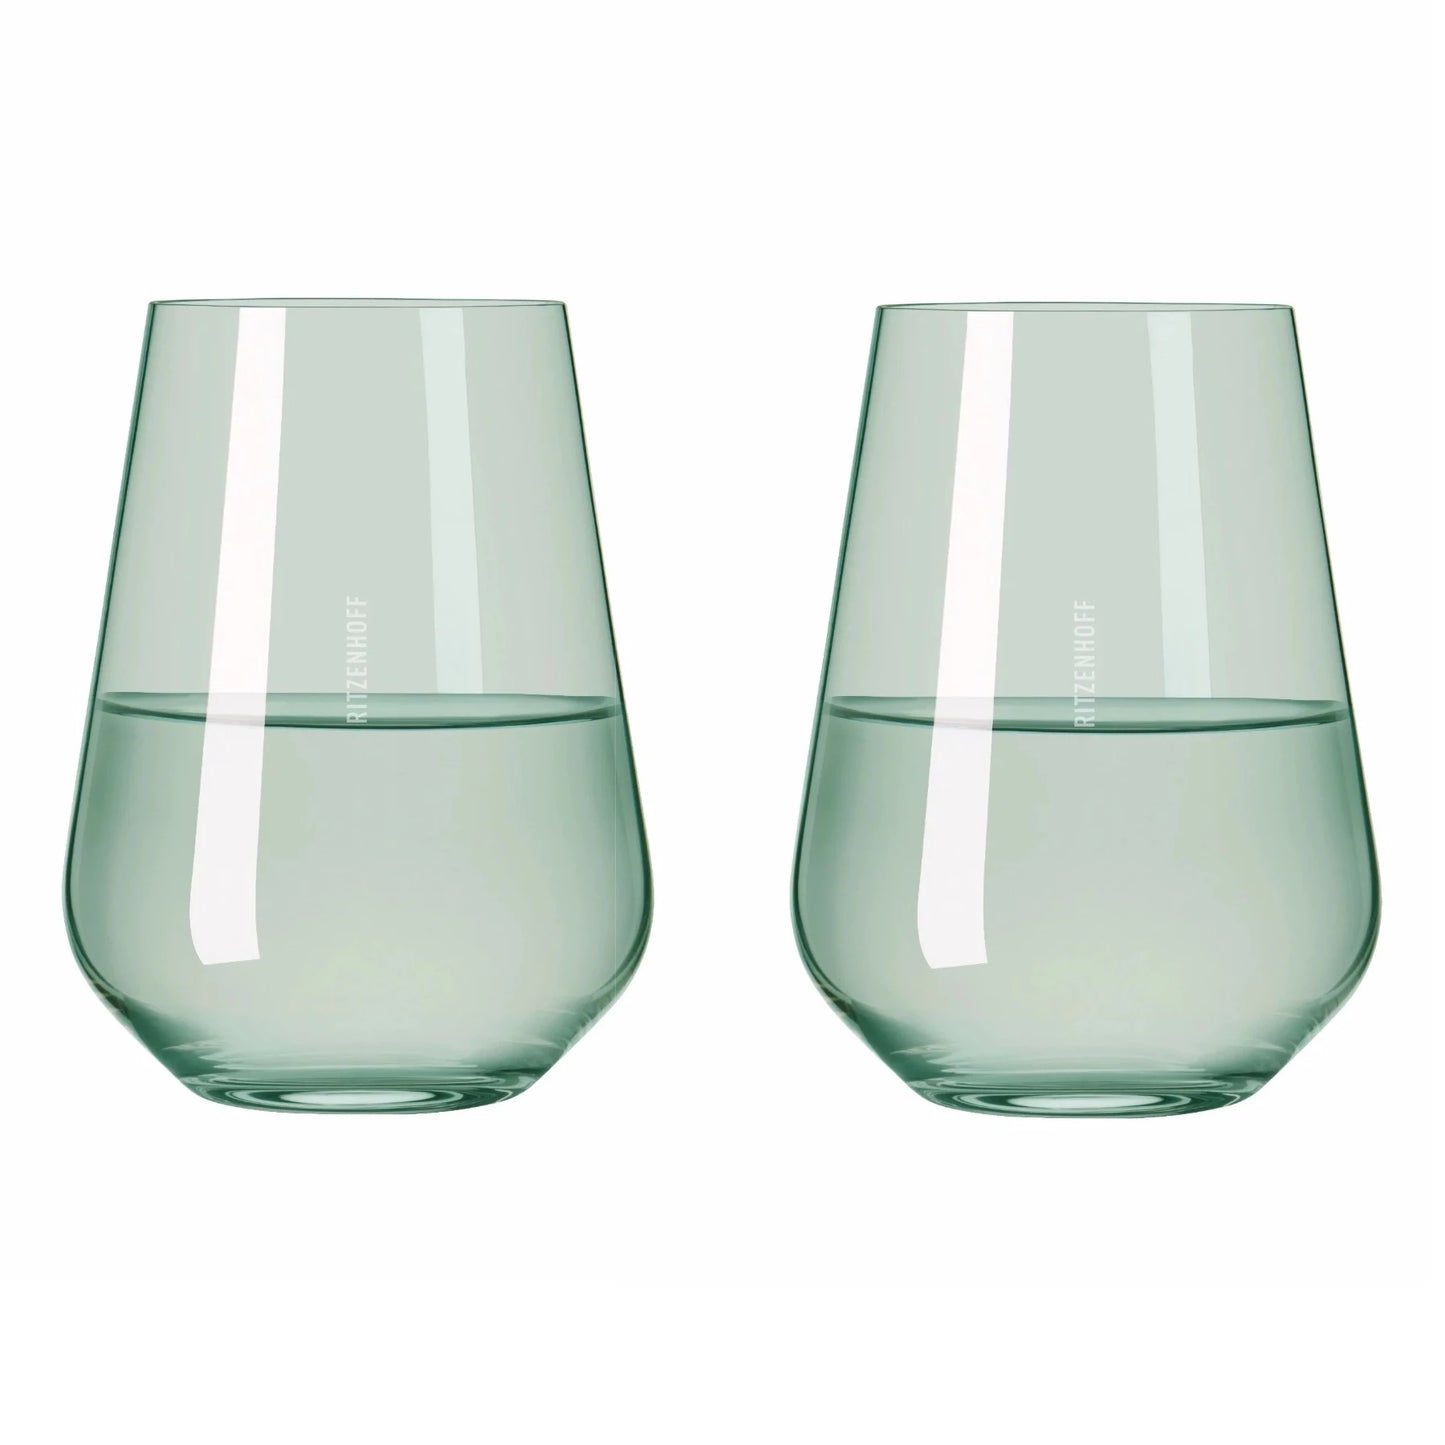 Fjord Light Water Glass,Green, Set of 2